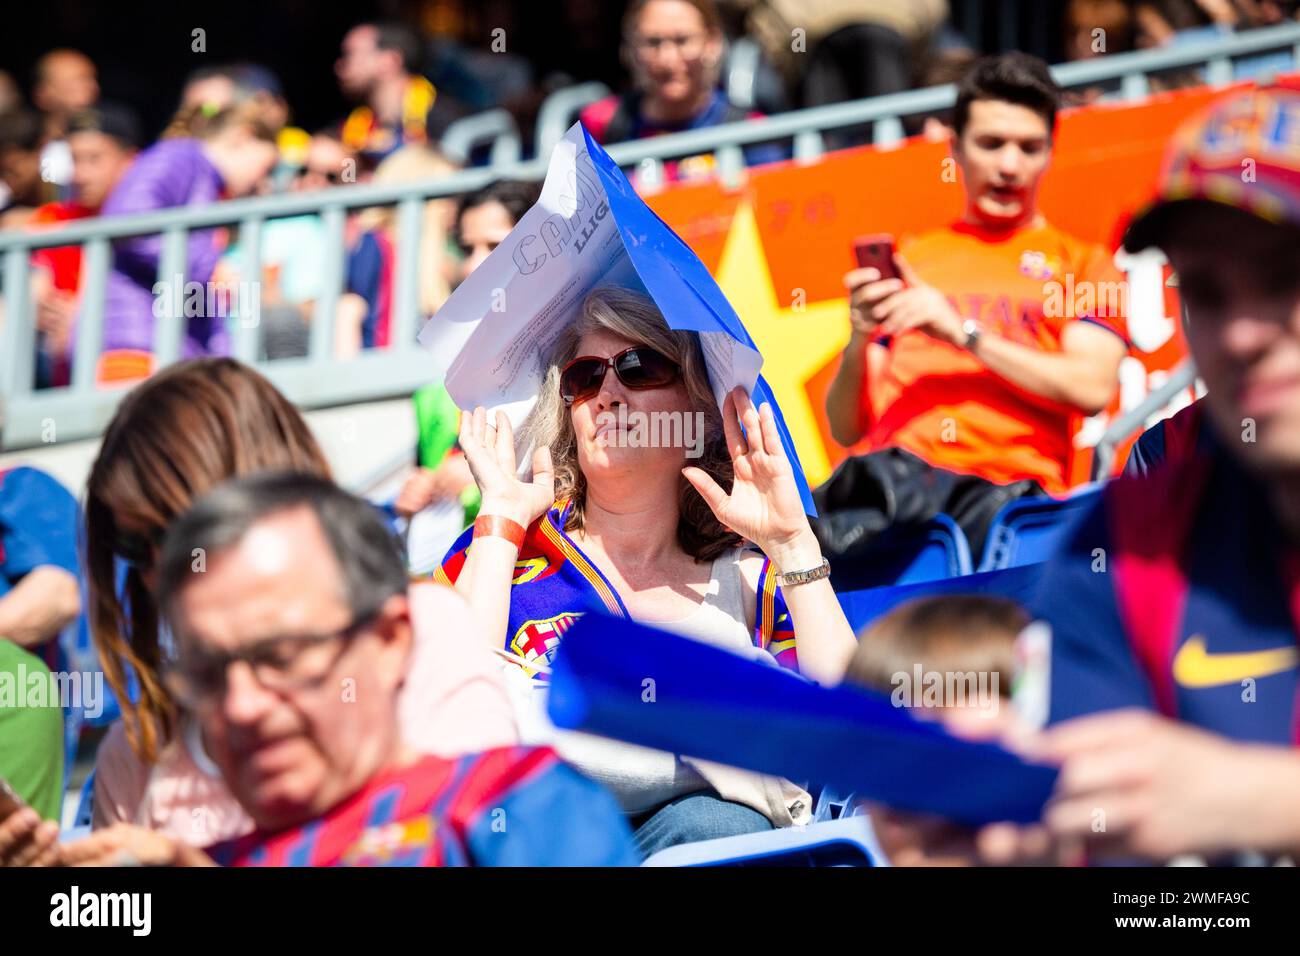 FANS, BARCELONA FC, 2015: A female fan improvises protection against the strong evening sunshine. Fans gather at Camp Nou before match. The final game of the La Liga 2014-15 season in Spain between Barcelona FC and Deportivo de La Coruna at Camp Nou, Barcelona on May 23 2015. The Game finished 2-2. Barcelona celebrated winning the championship title and legend Xavi's final home game. Deportiva got the point they needed to avoid relegation. Photograph: Rob Watkins Stock Photo